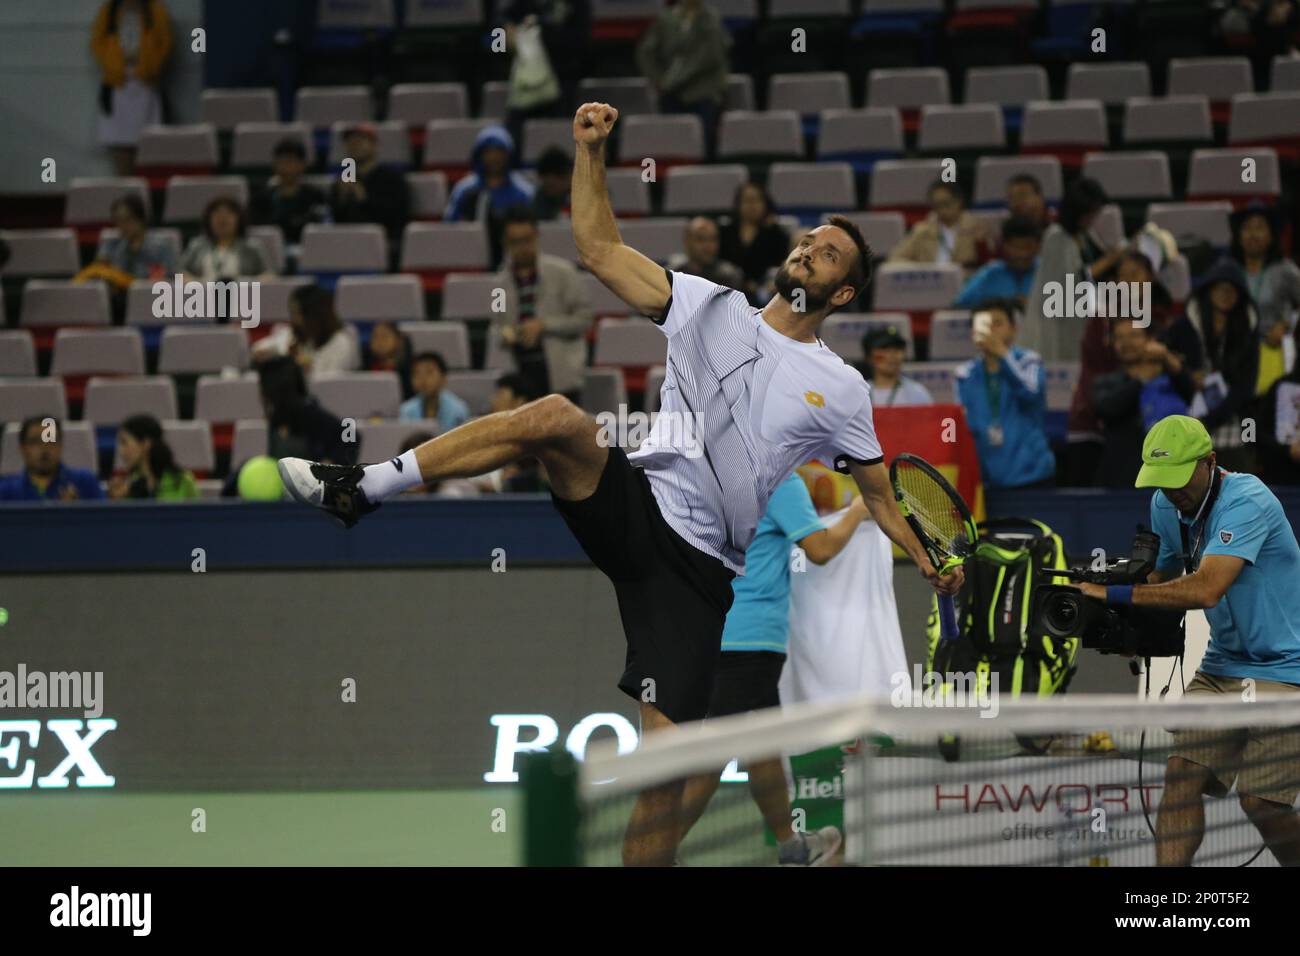 Viktor Troicki of Serbia celebrates after defeating Rafael Nadal of Spain in their mens singles second round match during the 2016 Shanghai Rolex Masters tennis tournament in Shanghai, China, 12 October 2016.Fourth